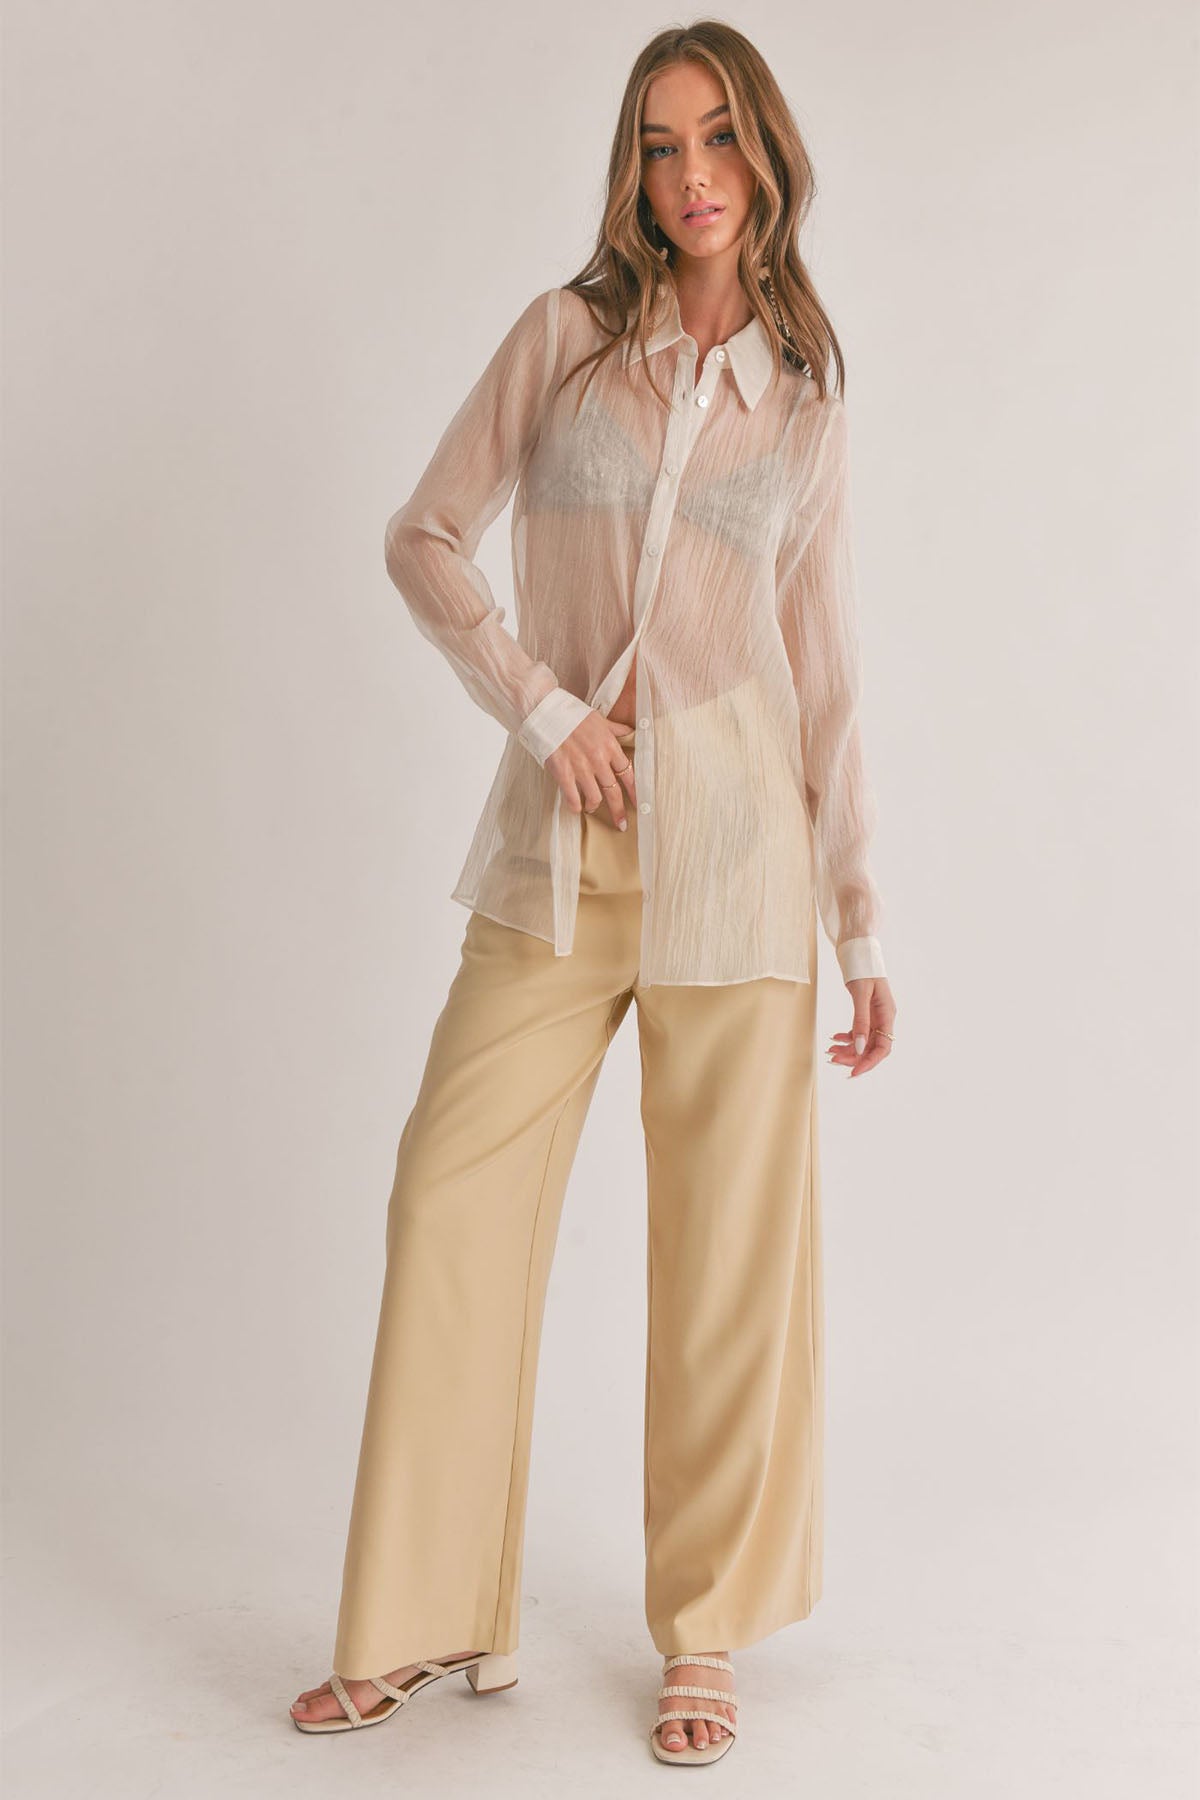 Sage the Label - Blurred Sheer Button Down Shirt - Butter